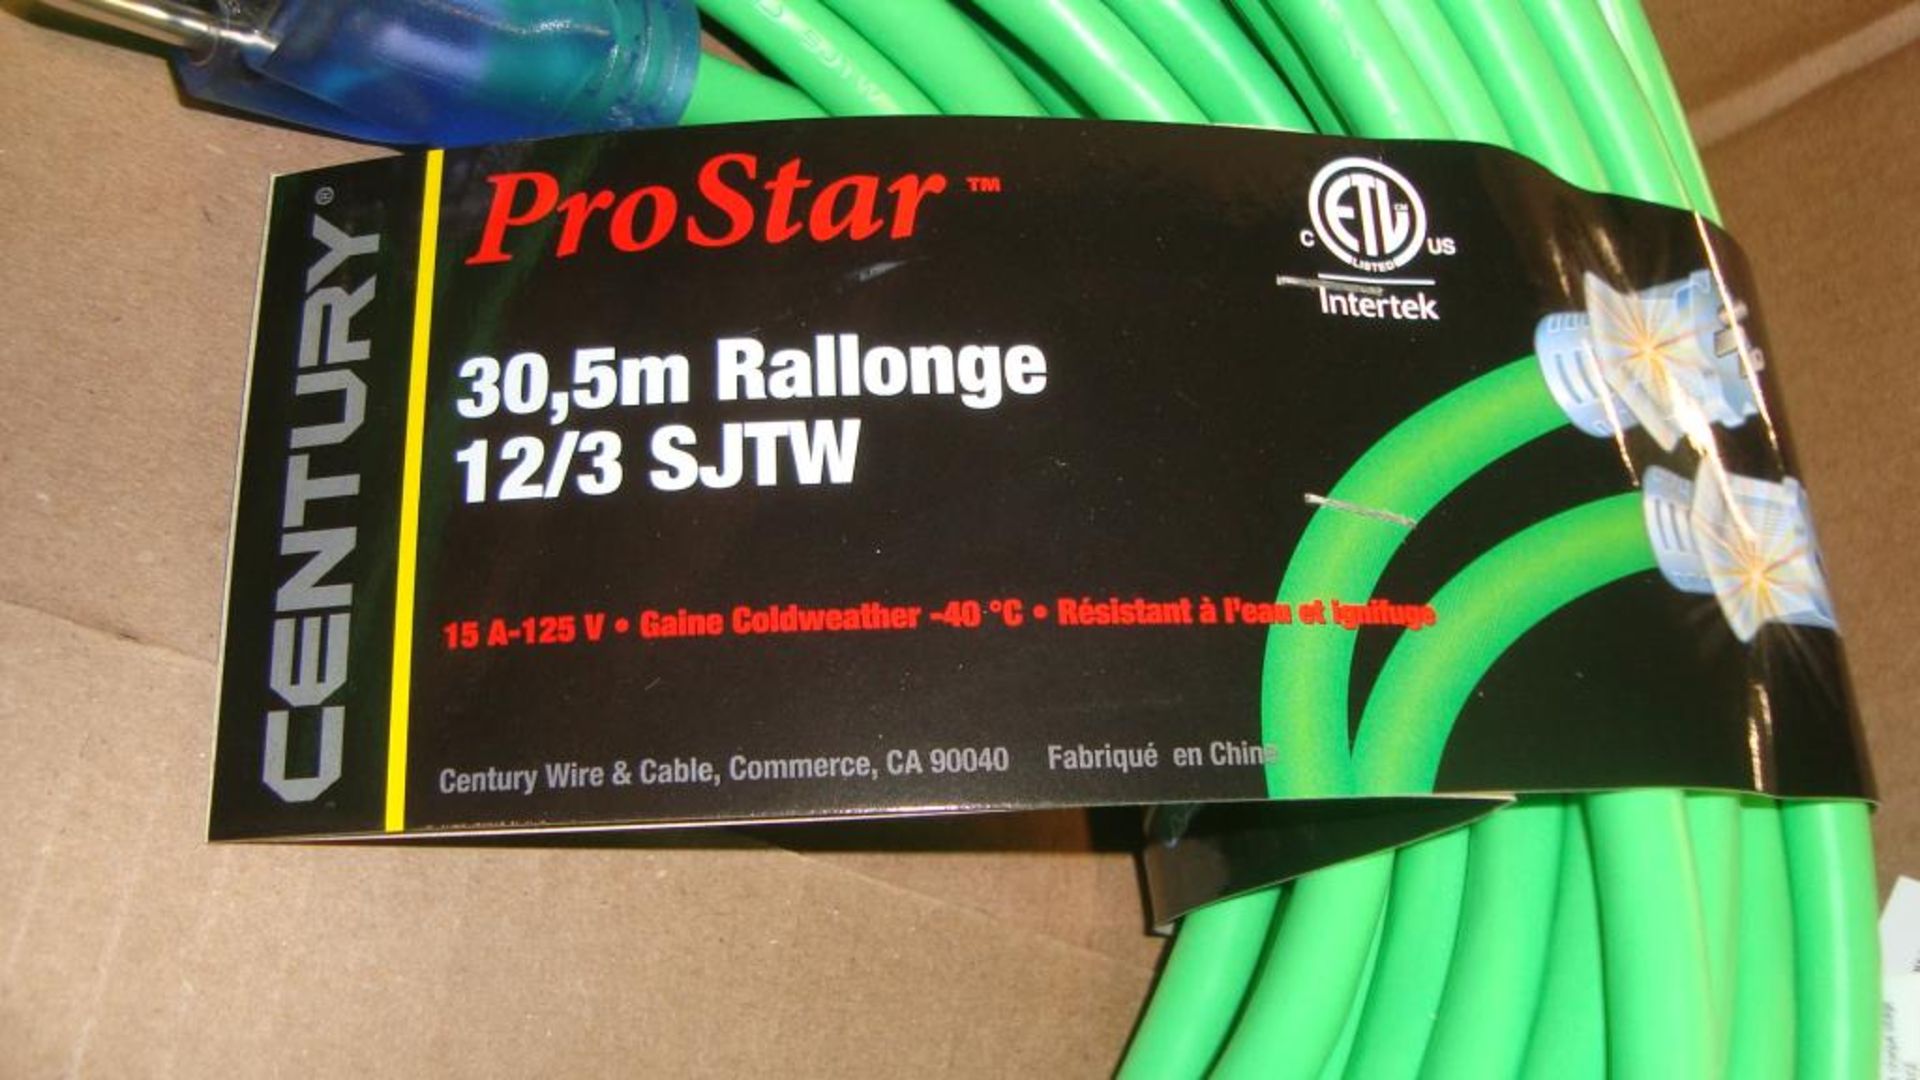 Extension Cords. Lot: 144 Total (36 Boxes - 4 ea.) Century Wire & Cable pn #D11712100GN Pro- Star - Image 2 of 8